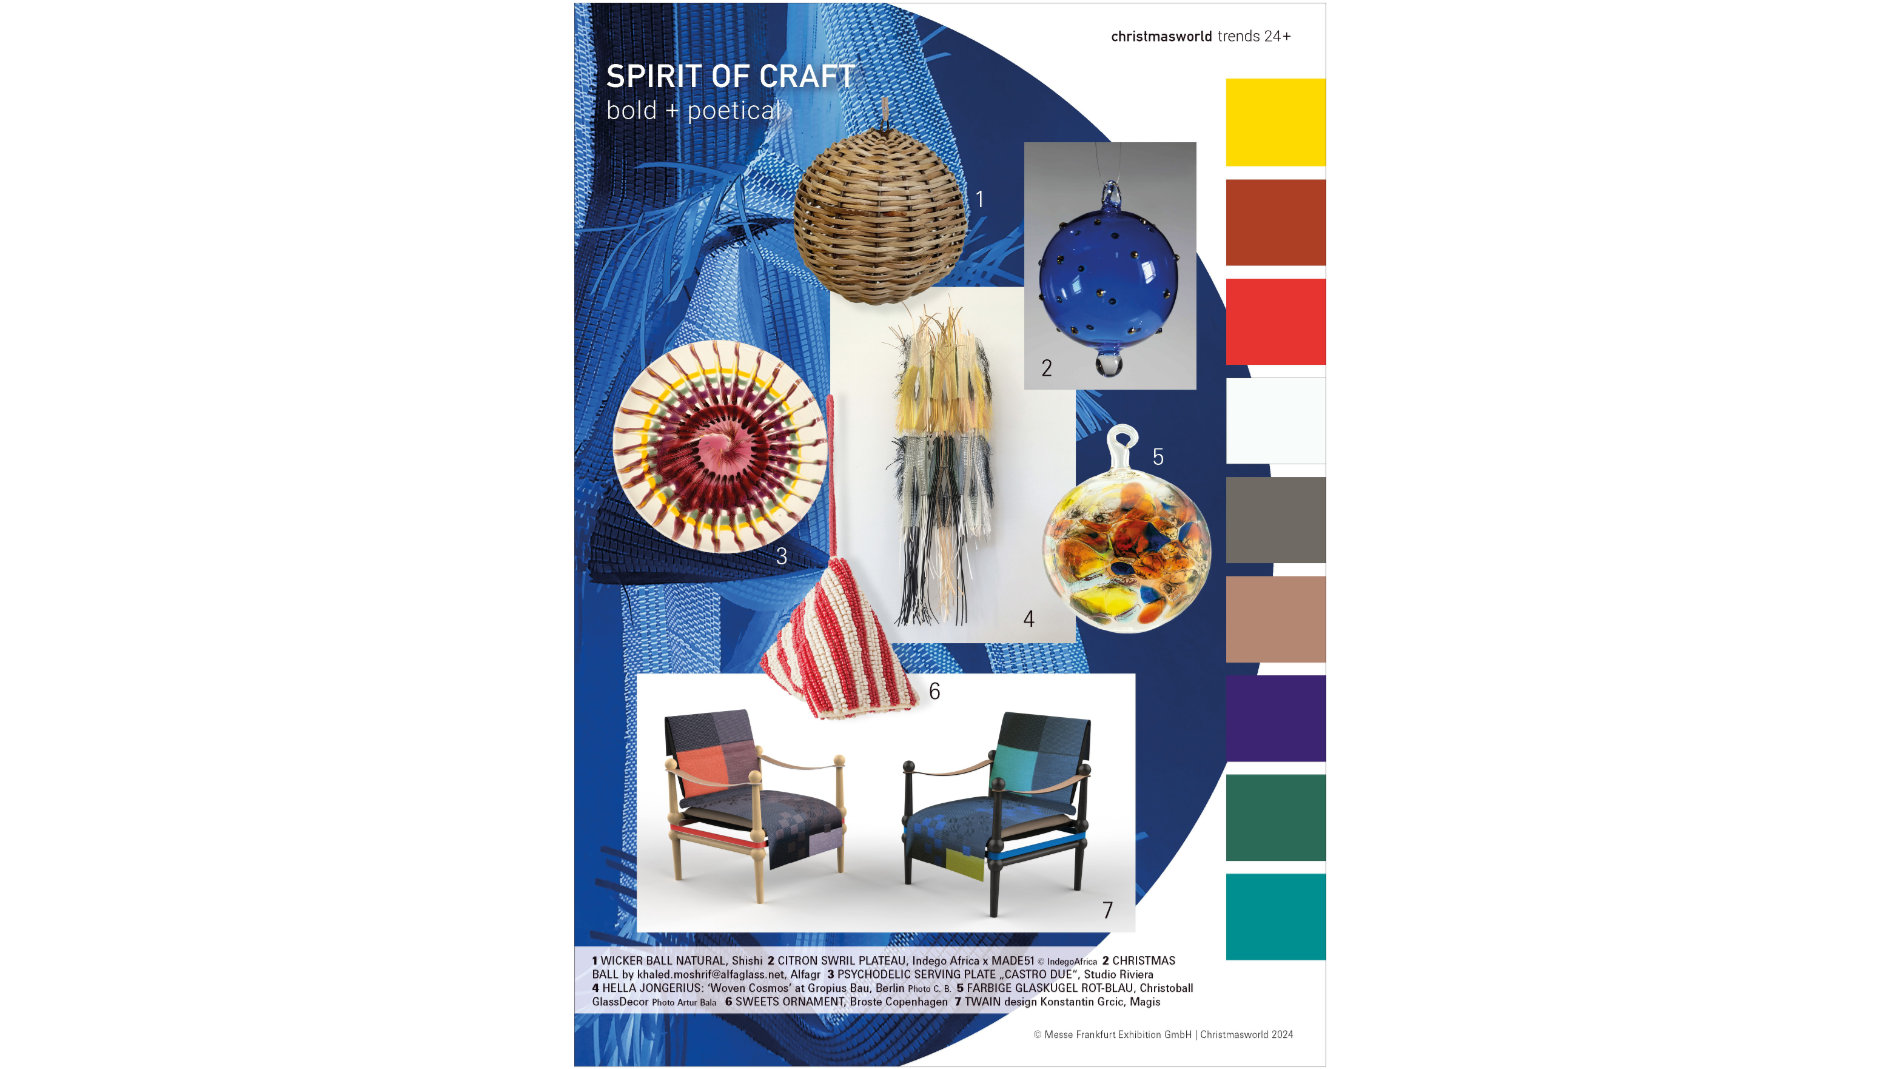 SPIRIT OF CRAFT_bold+poetical combines craft skills, vintage appeal and unusual, modern aesthetics with a very personal touch. Graphic: Messe Frankfurt.